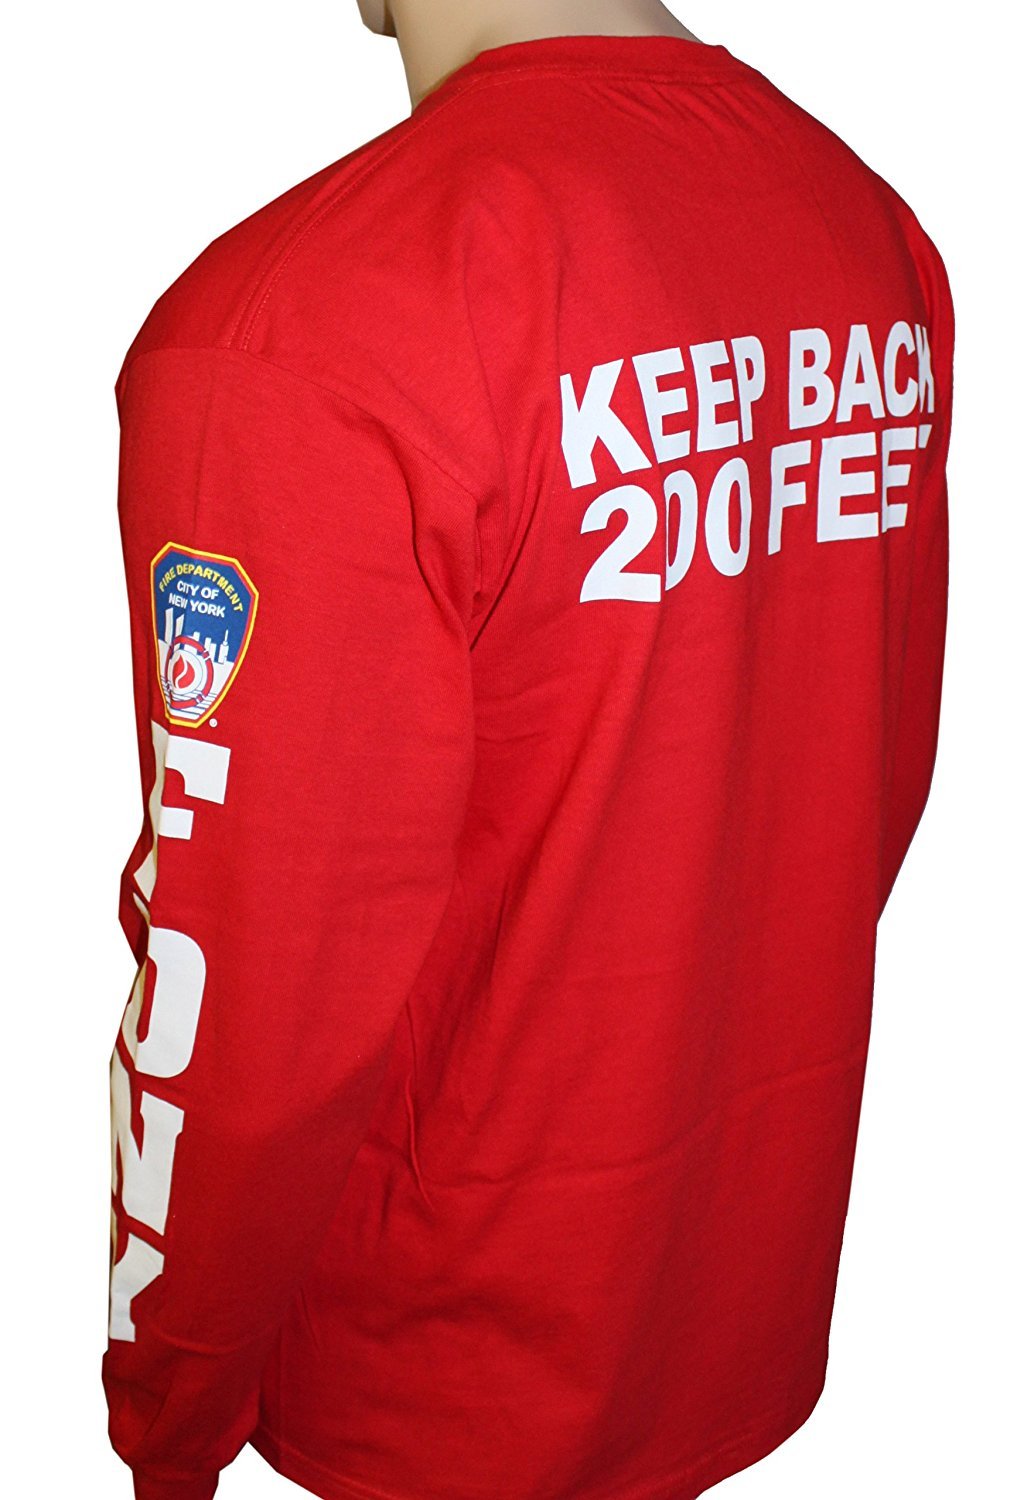 FDNY Long Sleeve Officially Licensed Keep Back 200 Feet T-Shirt Red